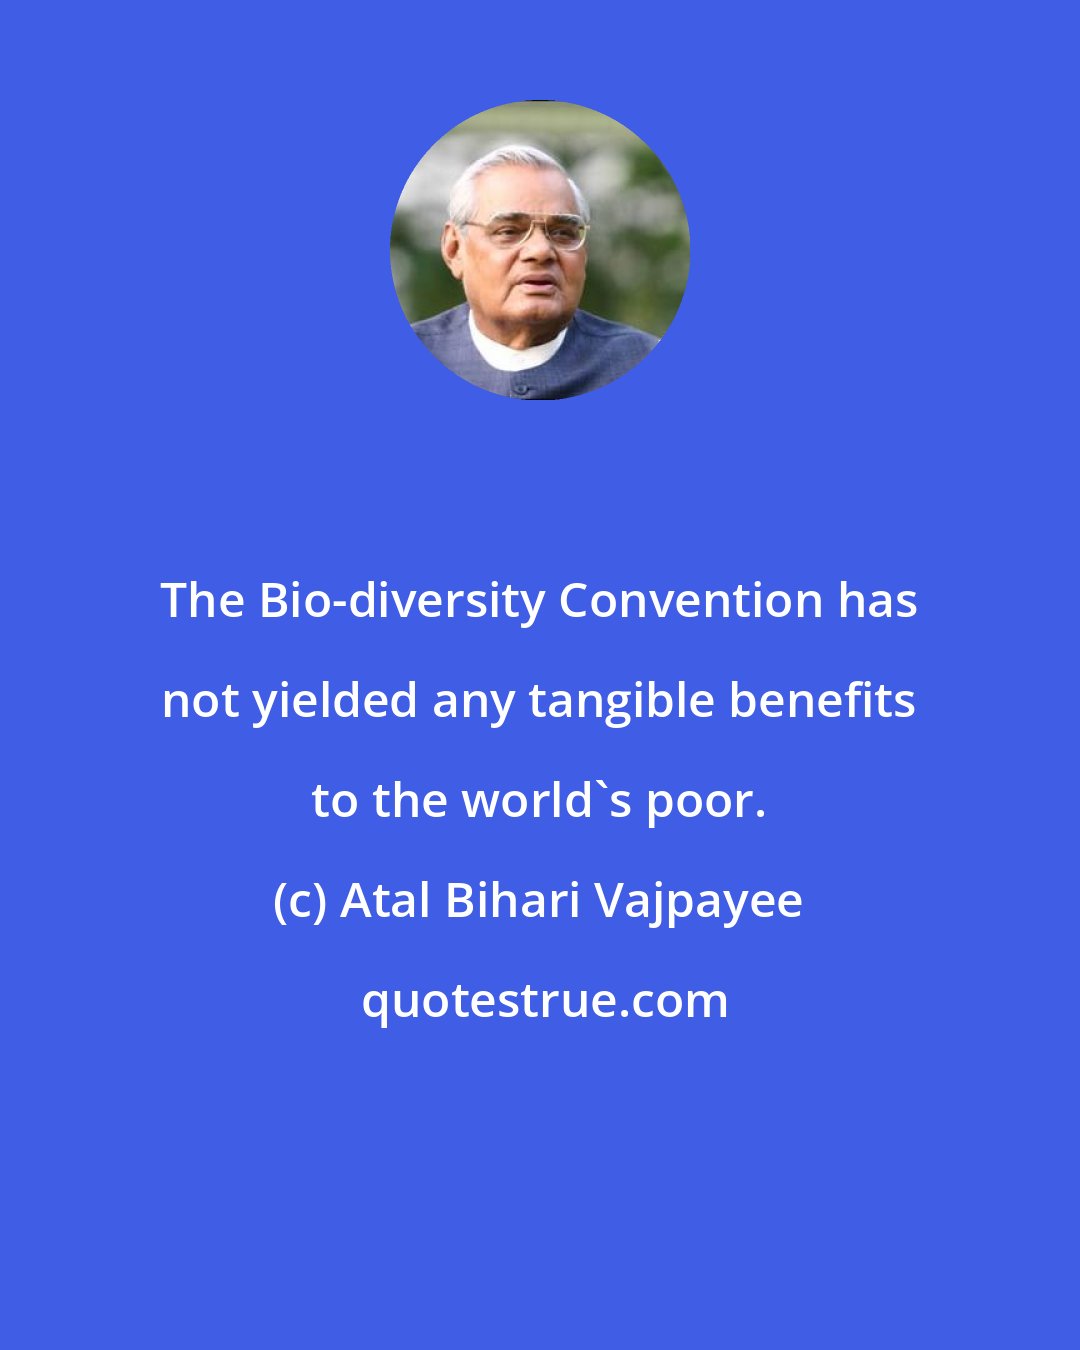 Atal Bihari Vajpayee: The Bio-diversity Convention has not yielded any tangible benefits to the world's poor.